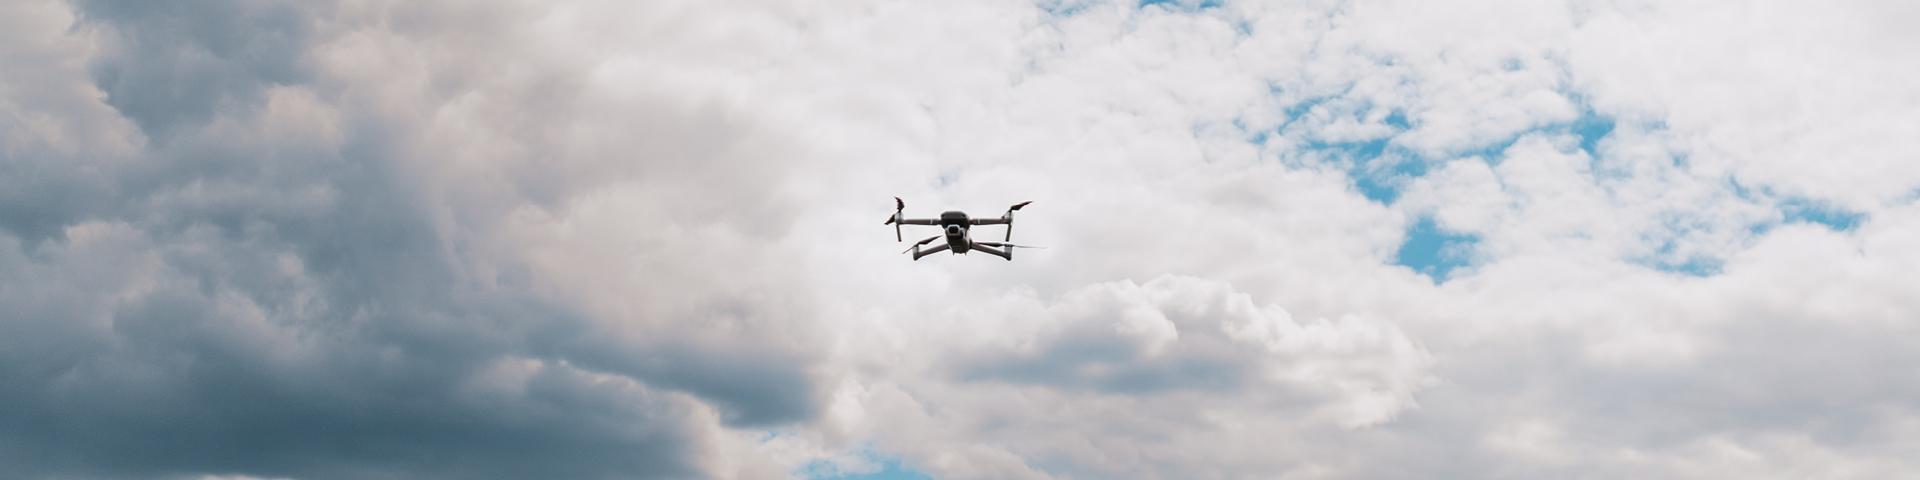 Image of drone in sky